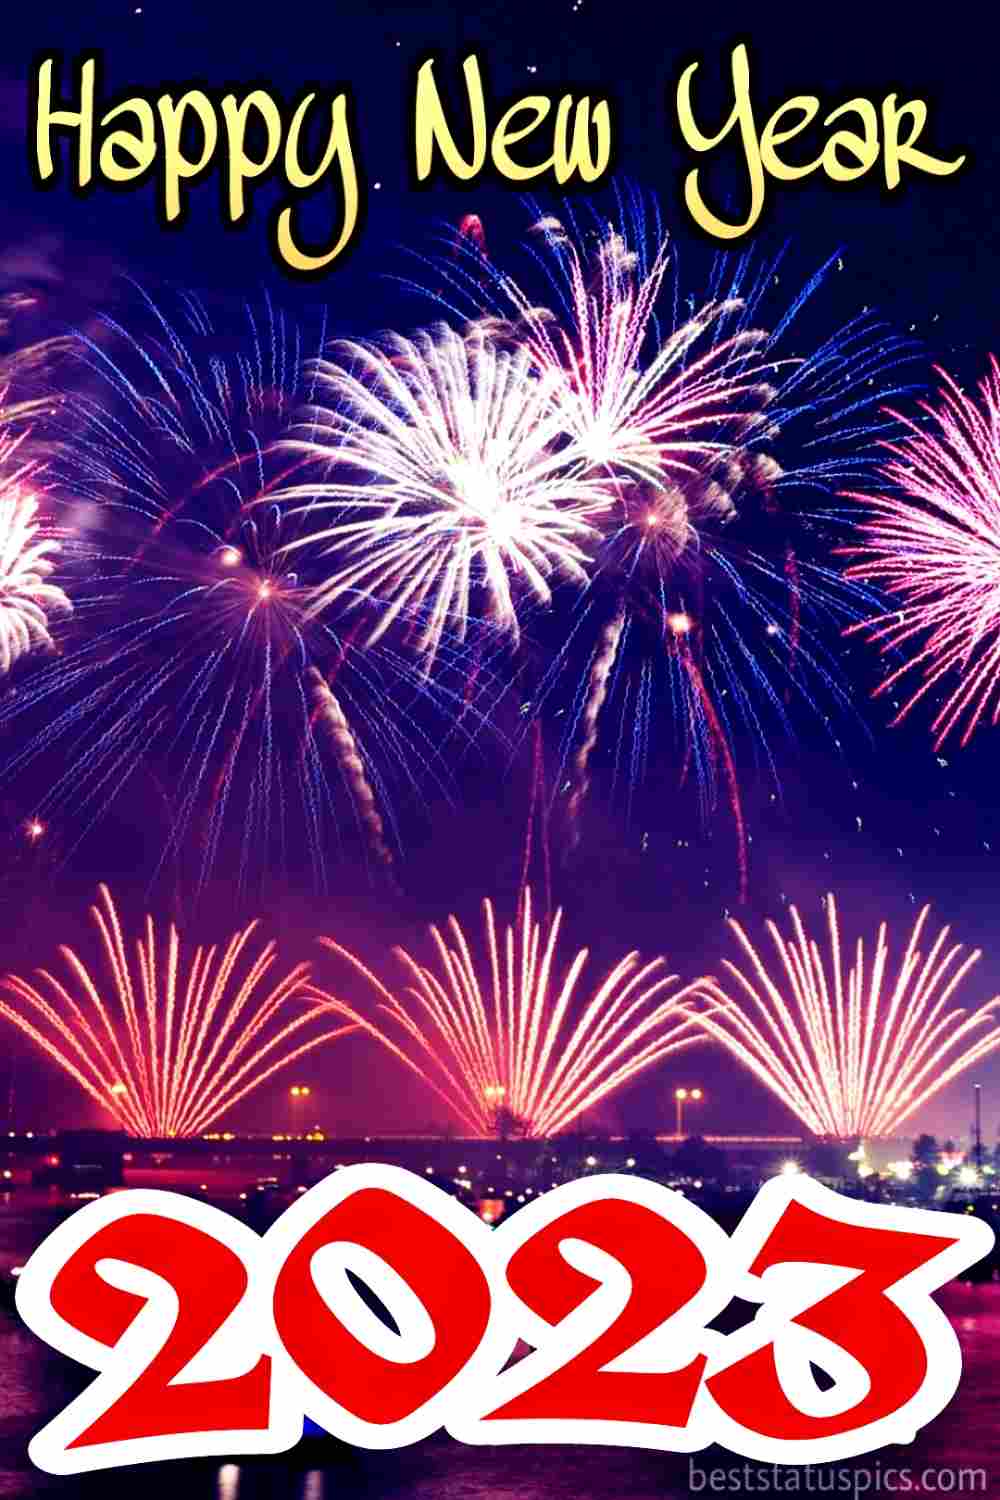 Happy new year 2023 wishes image with firework for friends